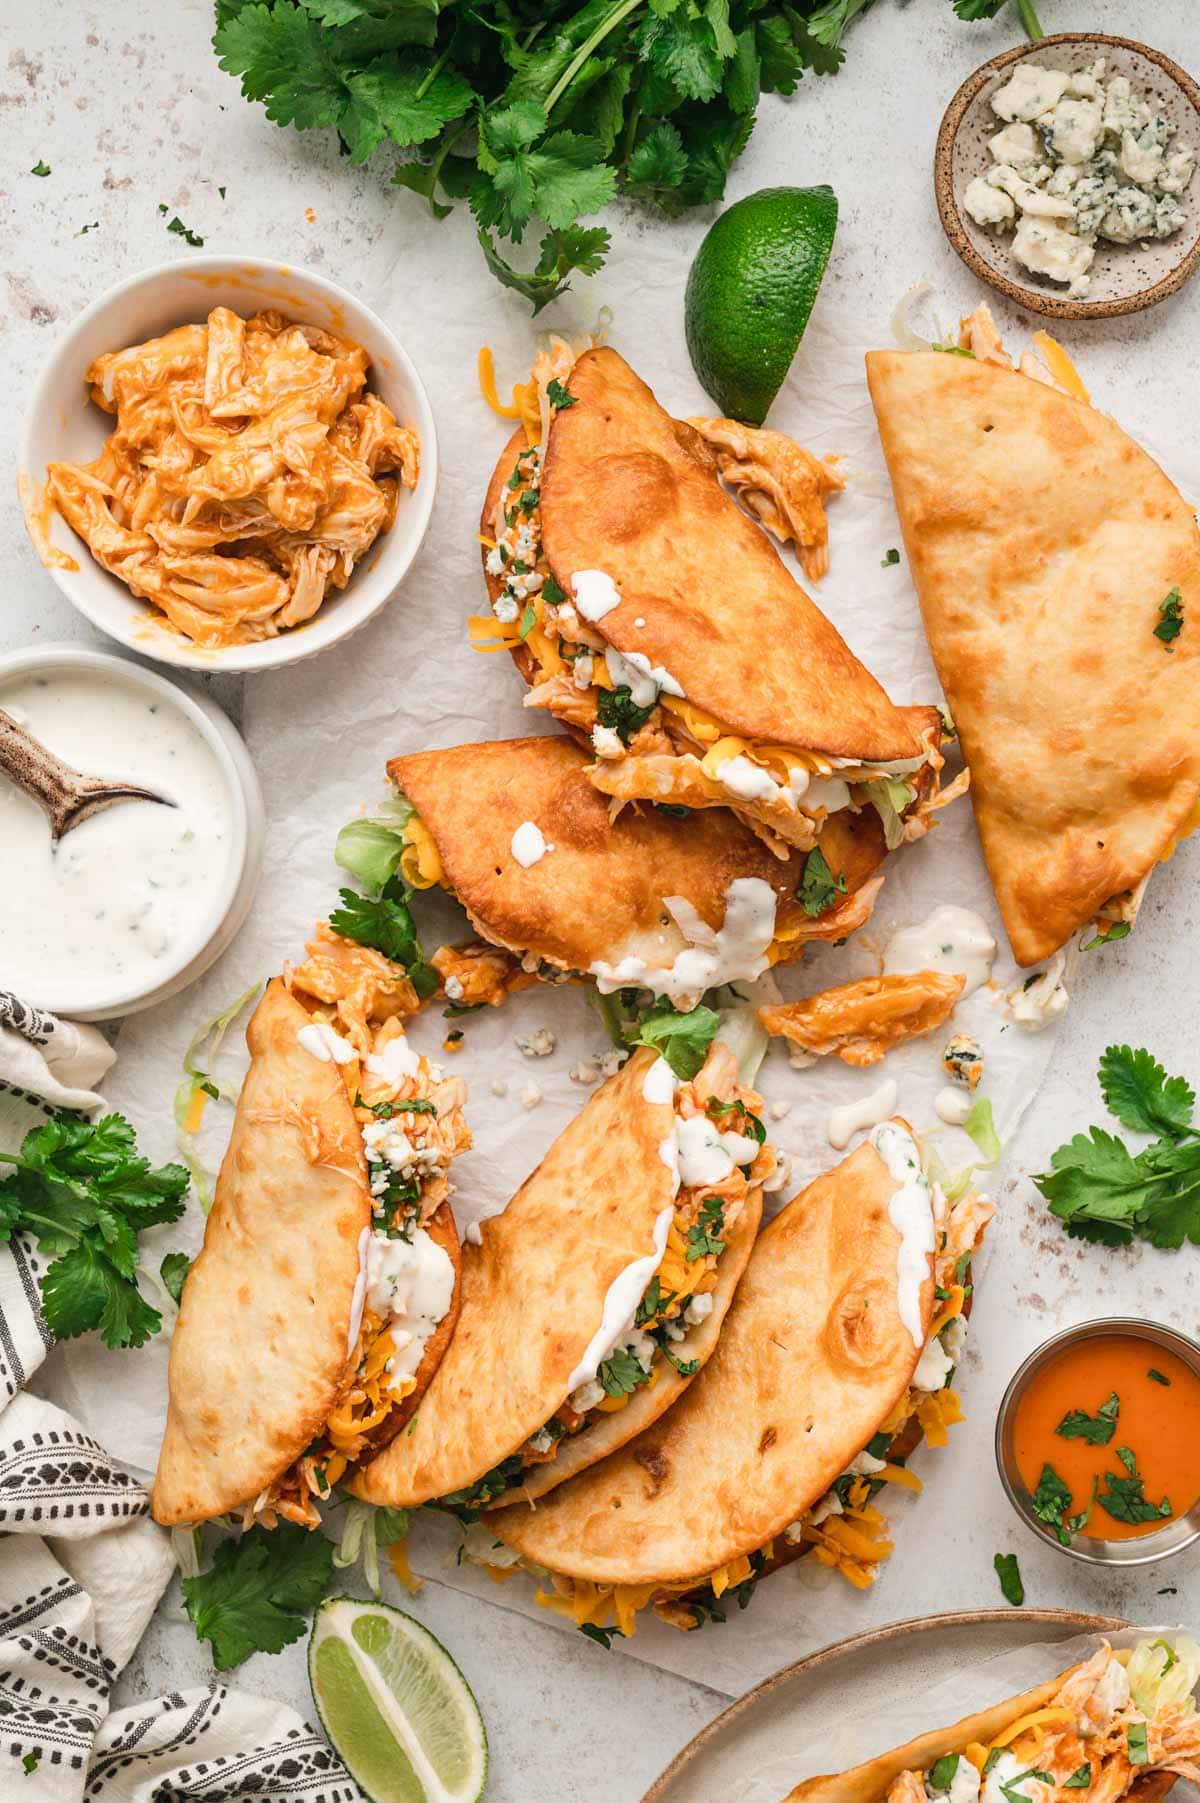 Buffalo chicken tacos with blue cheese, lettuce and cilantro, laying on a white surface.